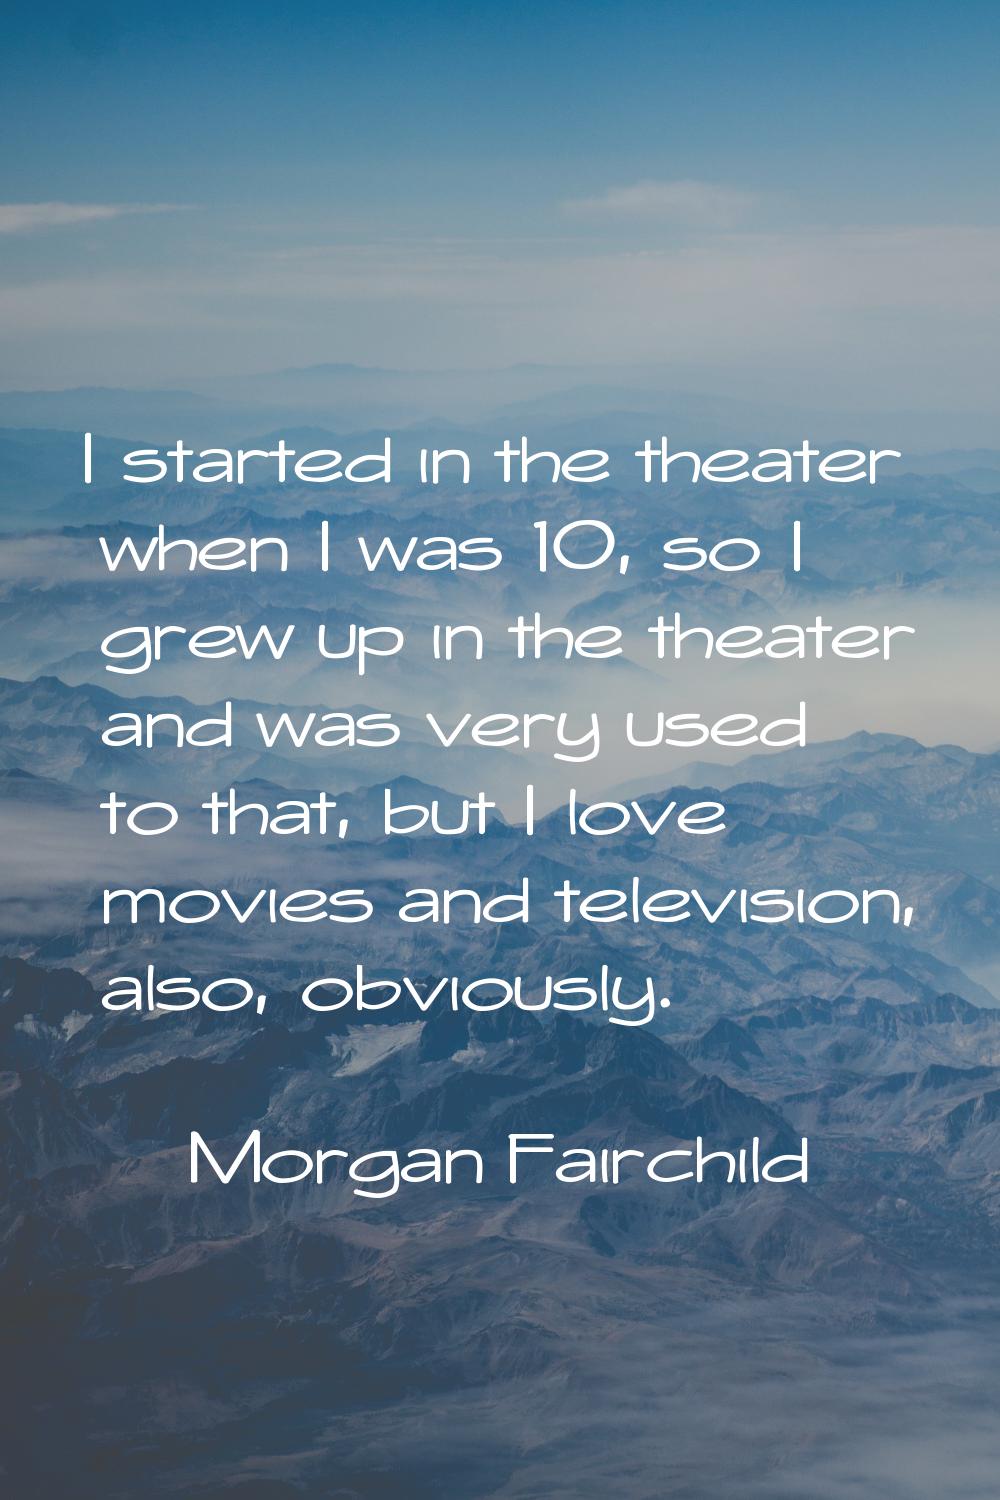 I started in the theater when I was 10, so I grew up in the theater and was very used to that, but 